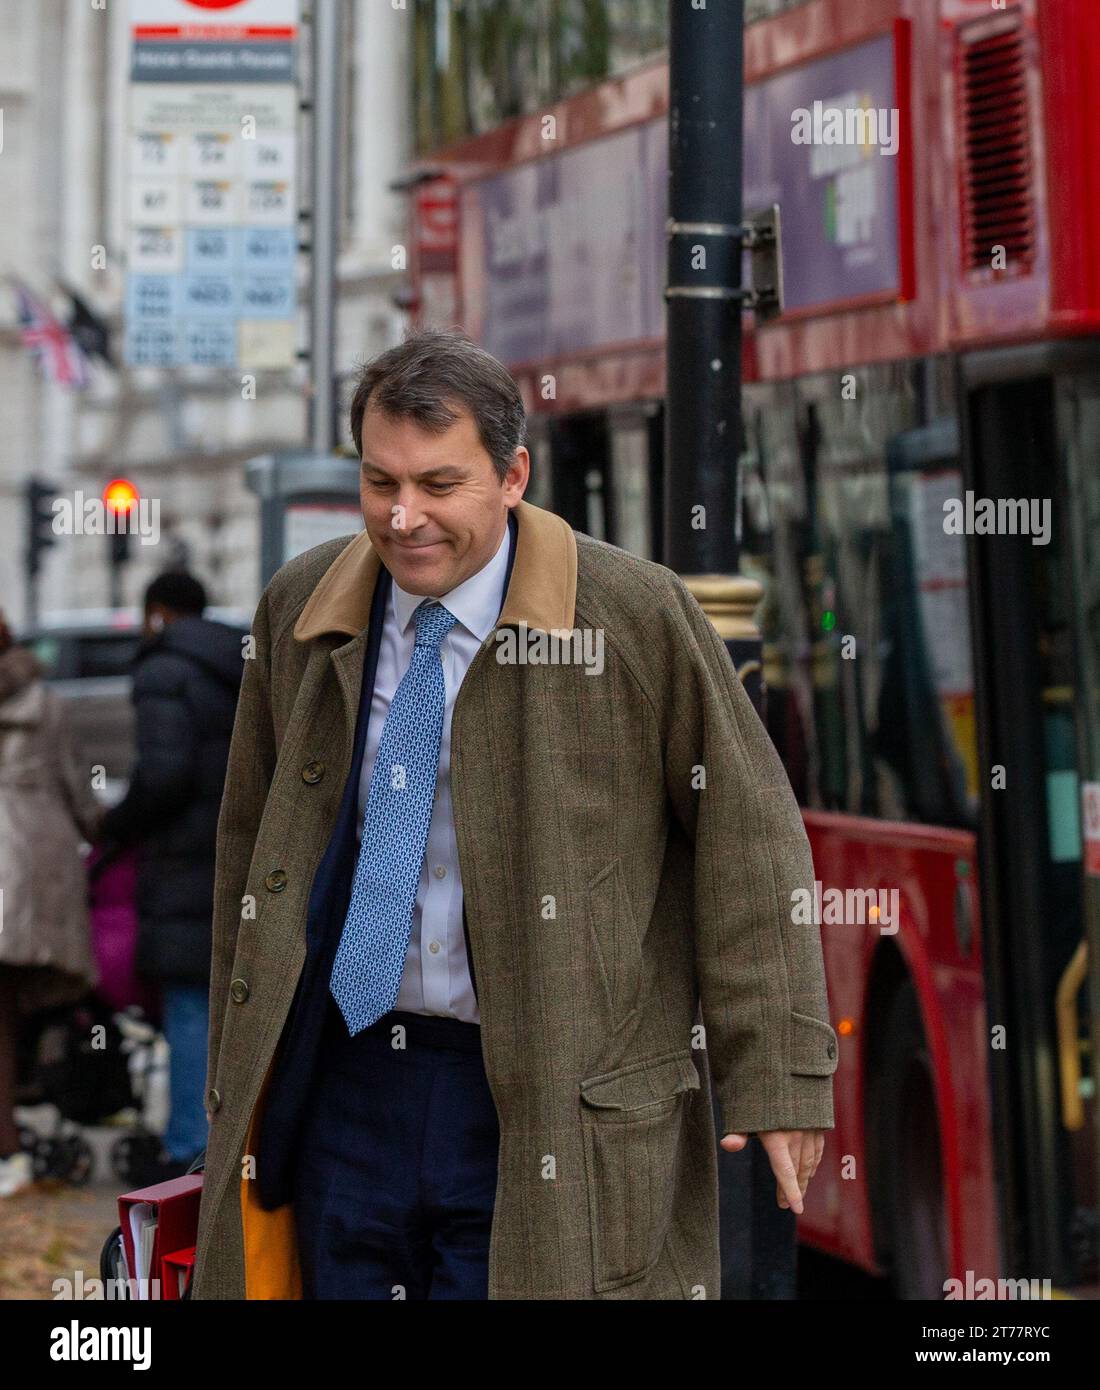 London, UK. 14th Nov  2023. John Glen MP was appointed Paymaster General and Minister for the Cabinet office He was previously Chief Secretary to the Treasury he Arrives at cabinet offie  today for Cabinet meeting Credit: Richard Lincoln/Alamy Live News Stock Photo